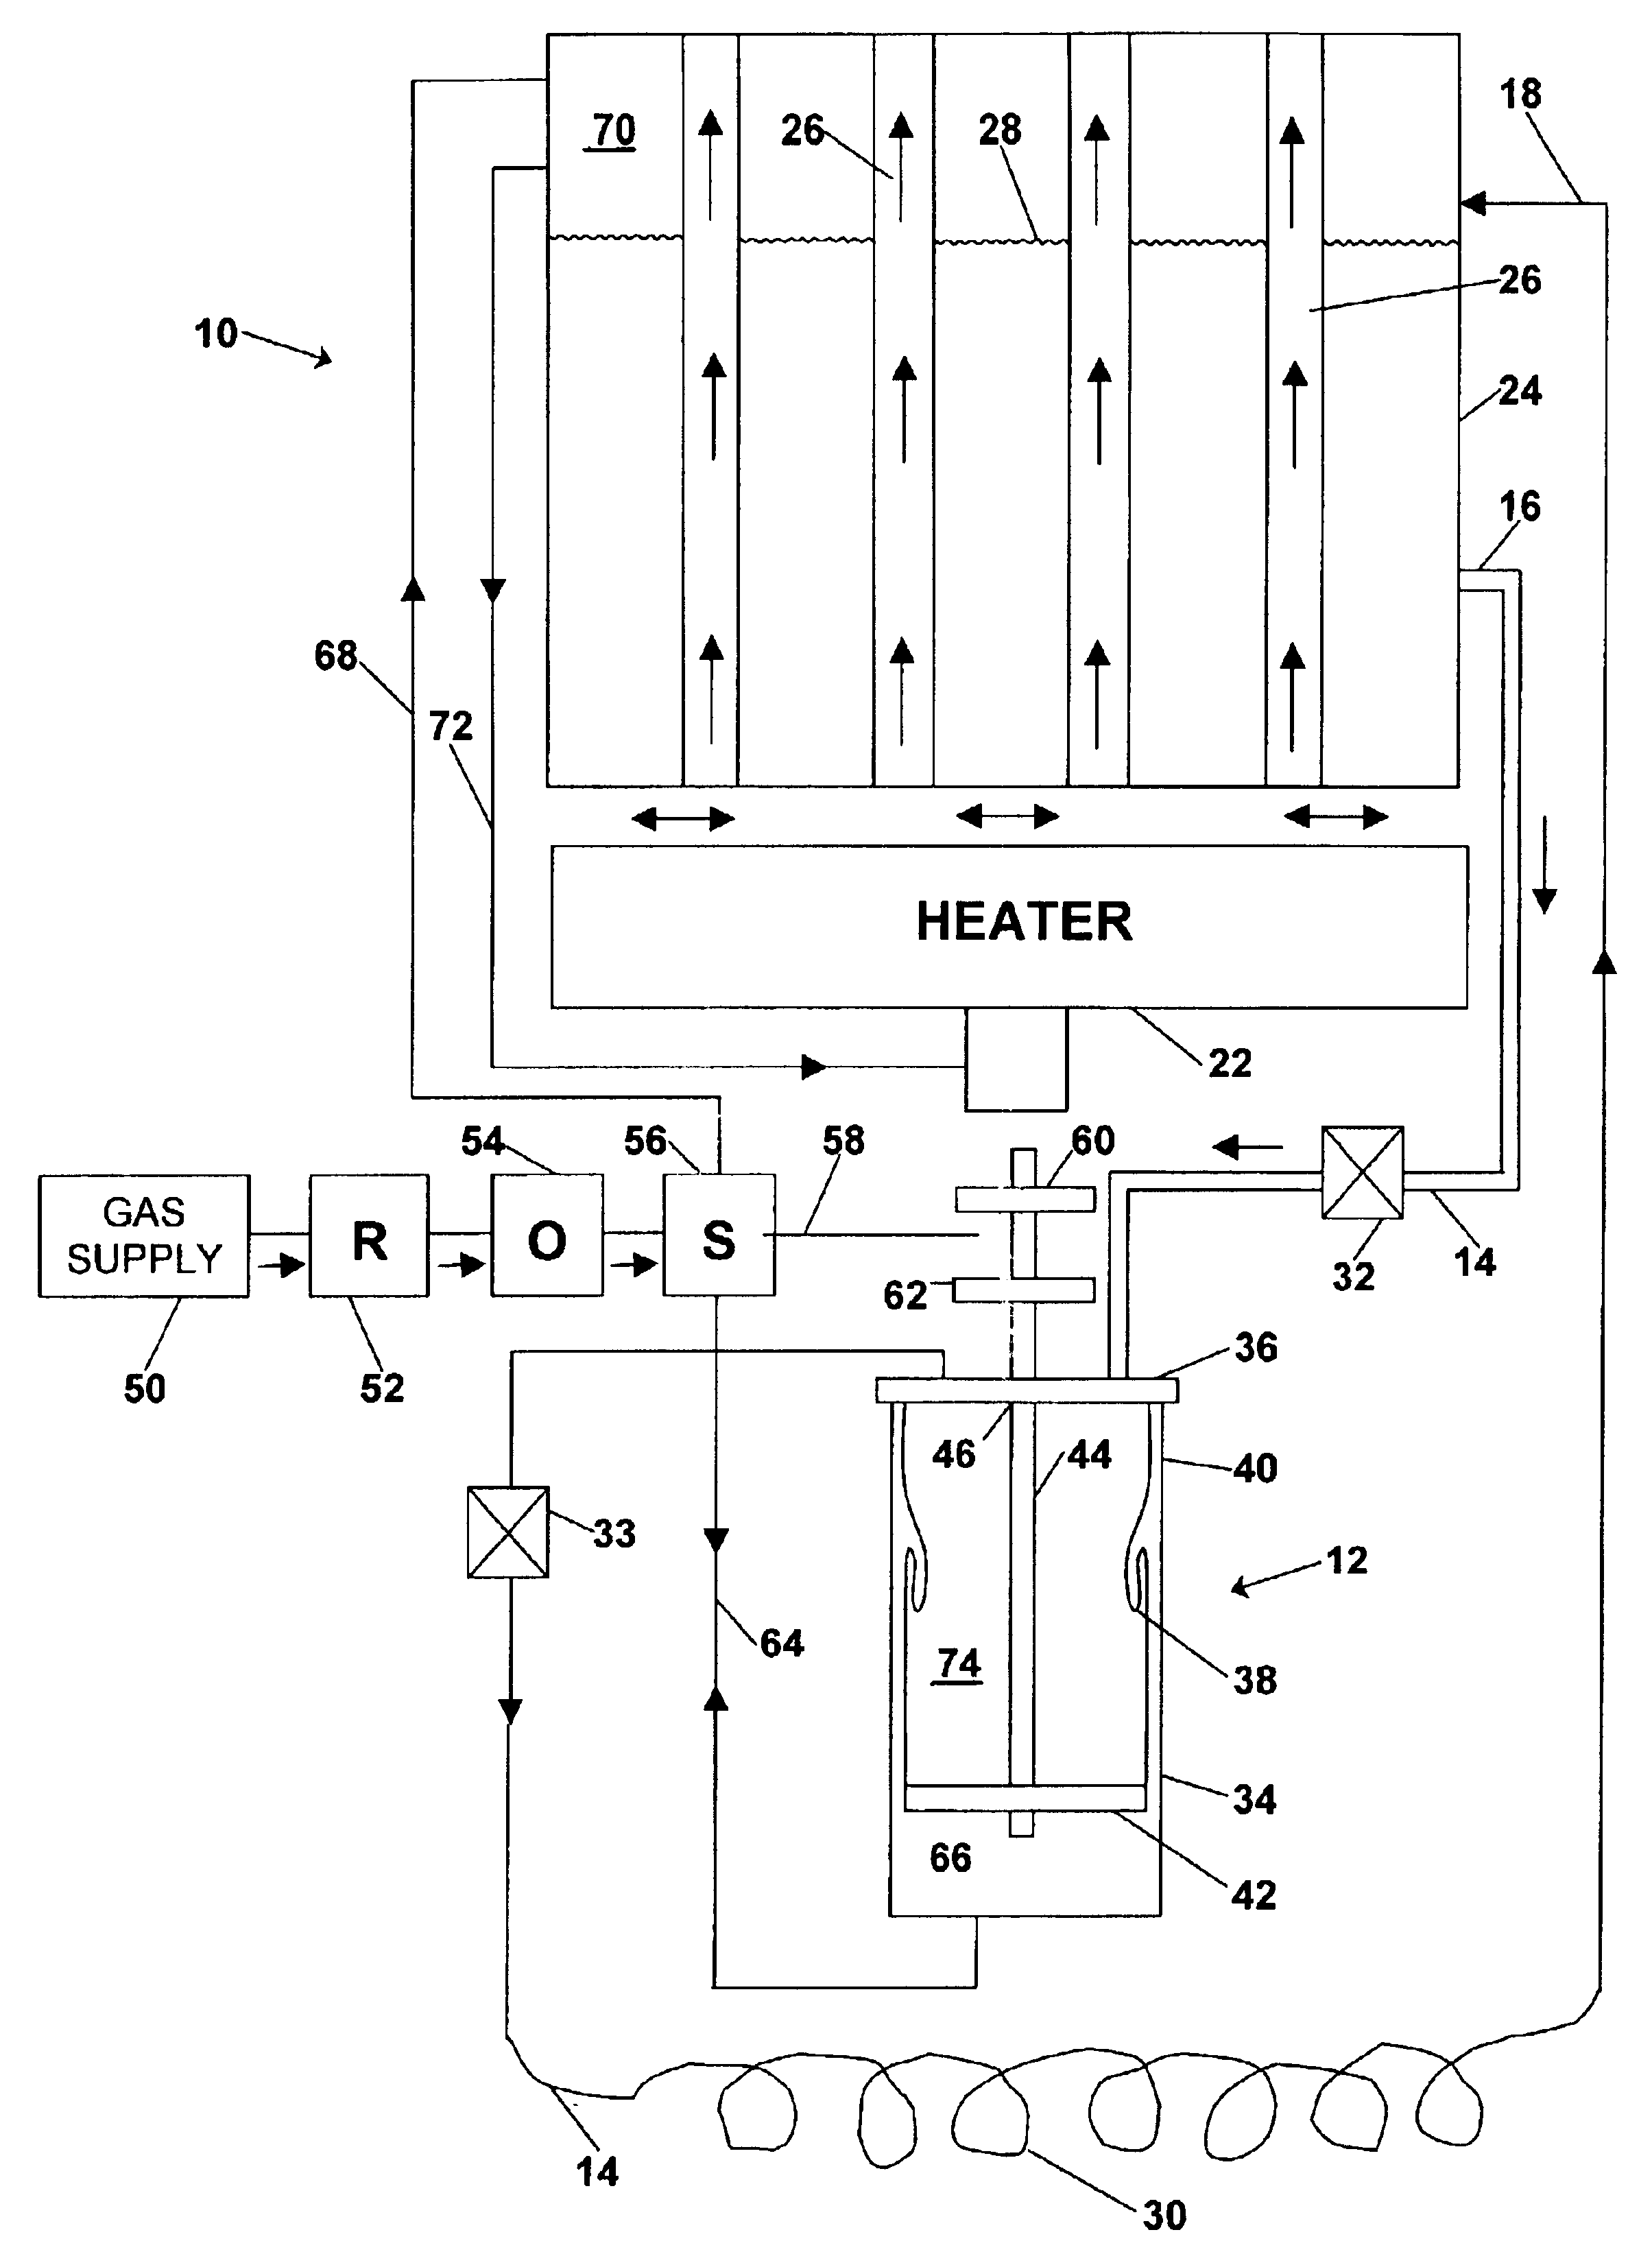 Gas powered heat delivery system